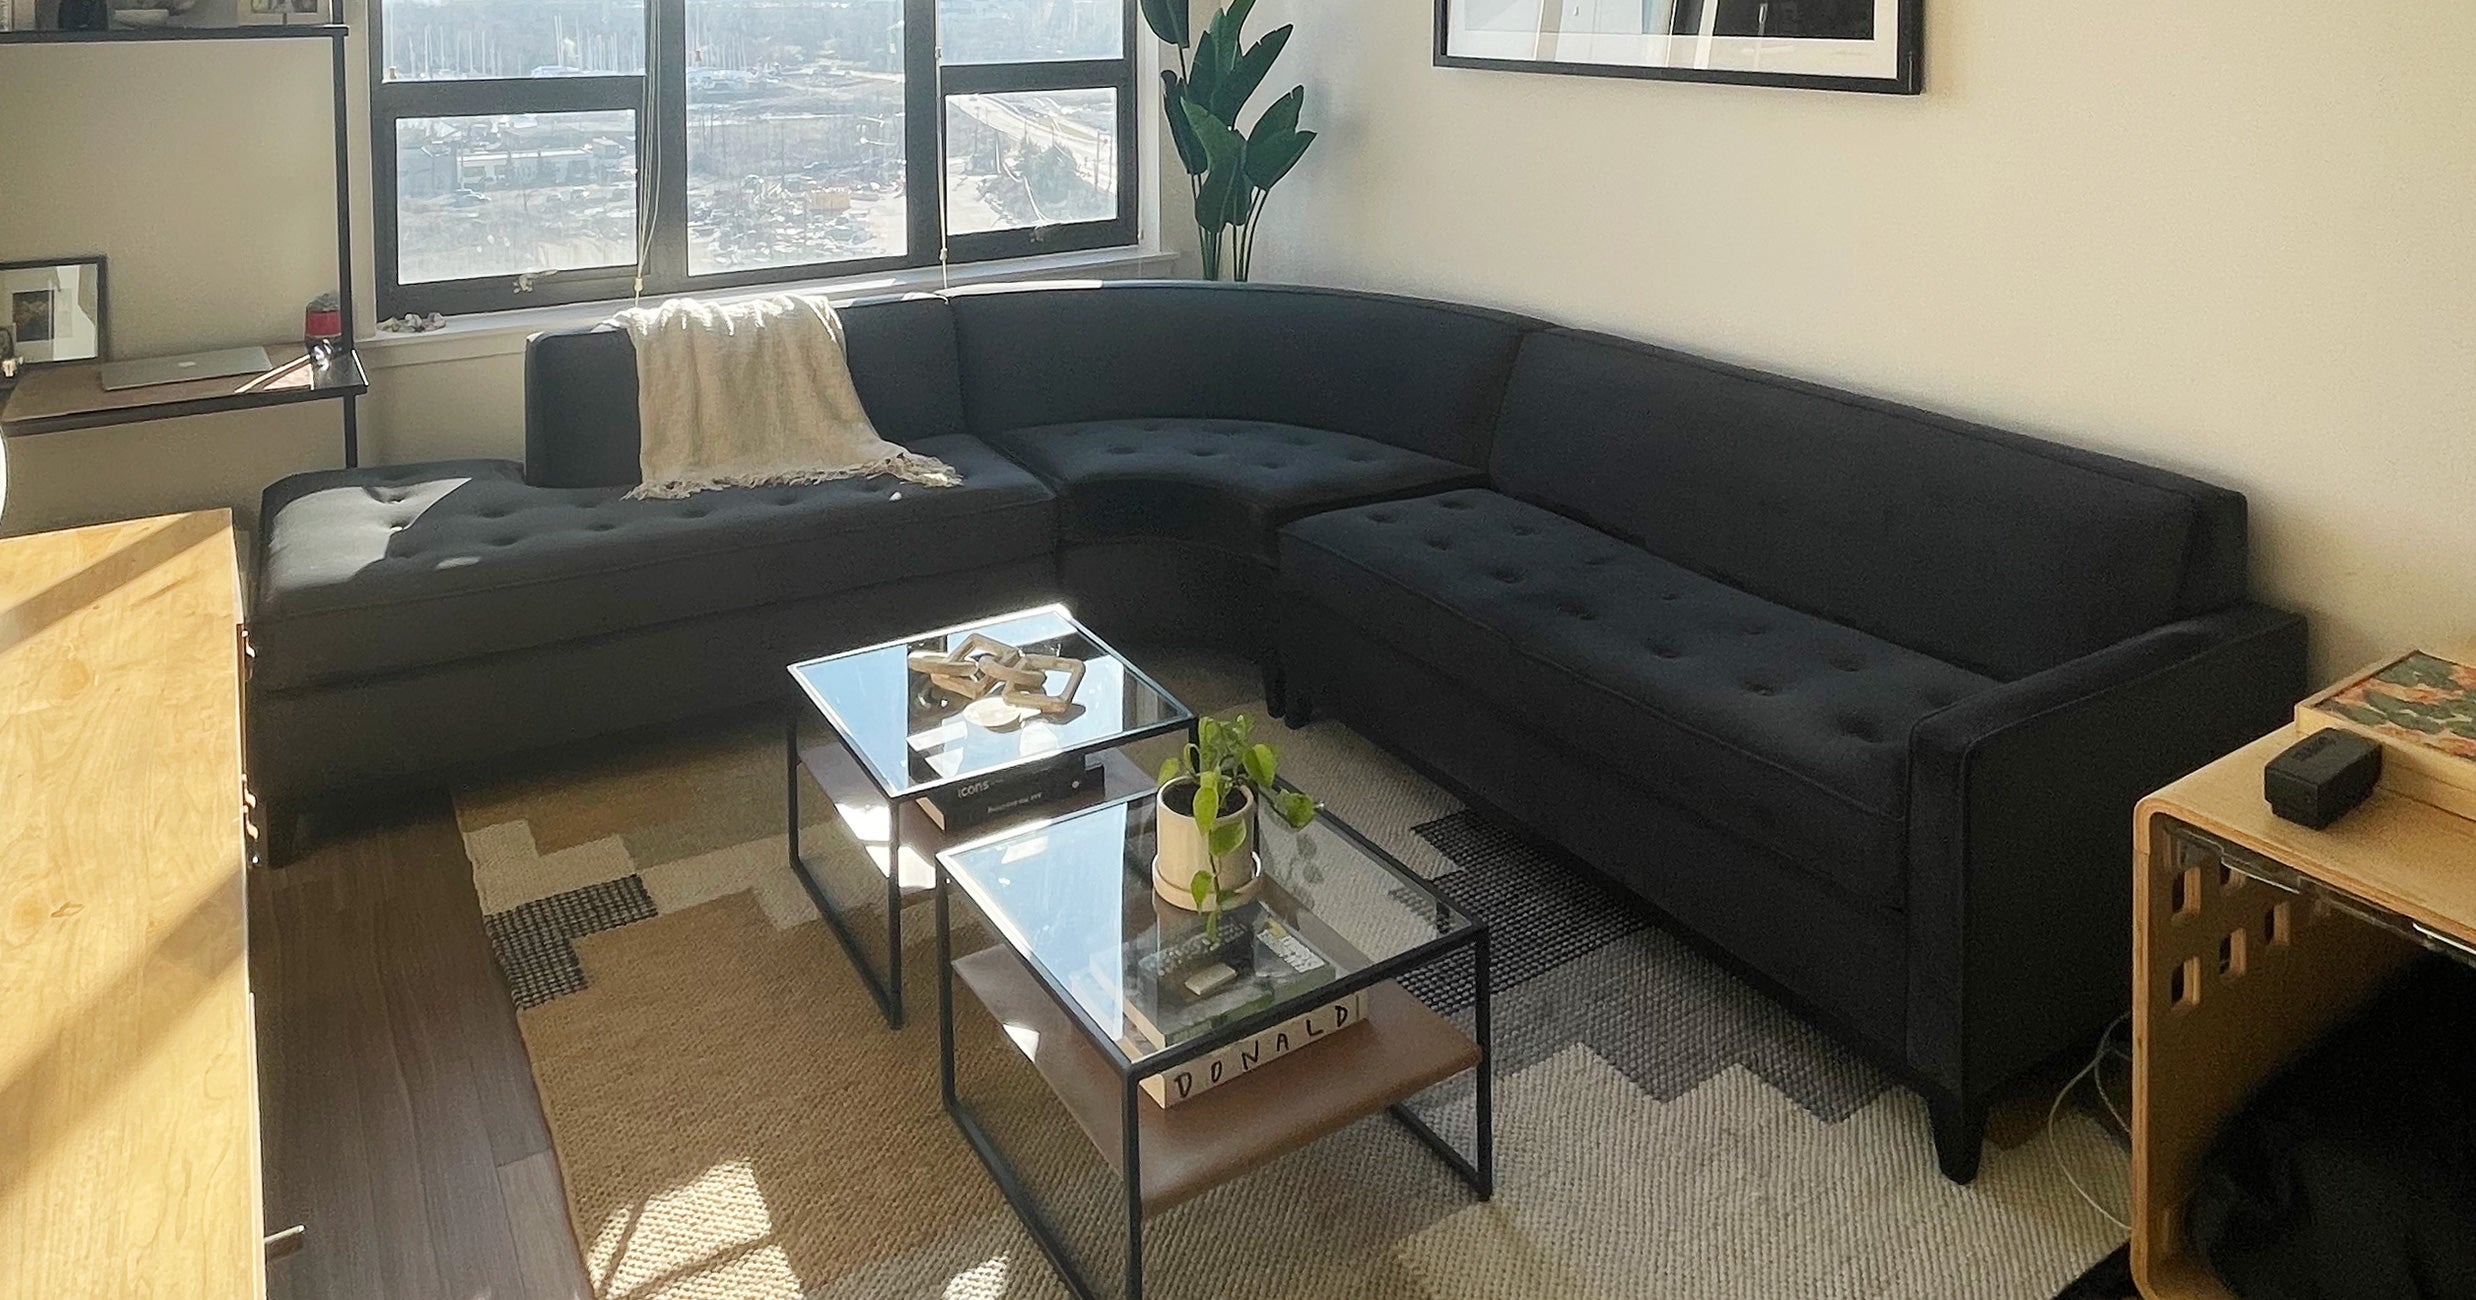 No Lie: I’m in Love With This Apt2B Sectional Couch